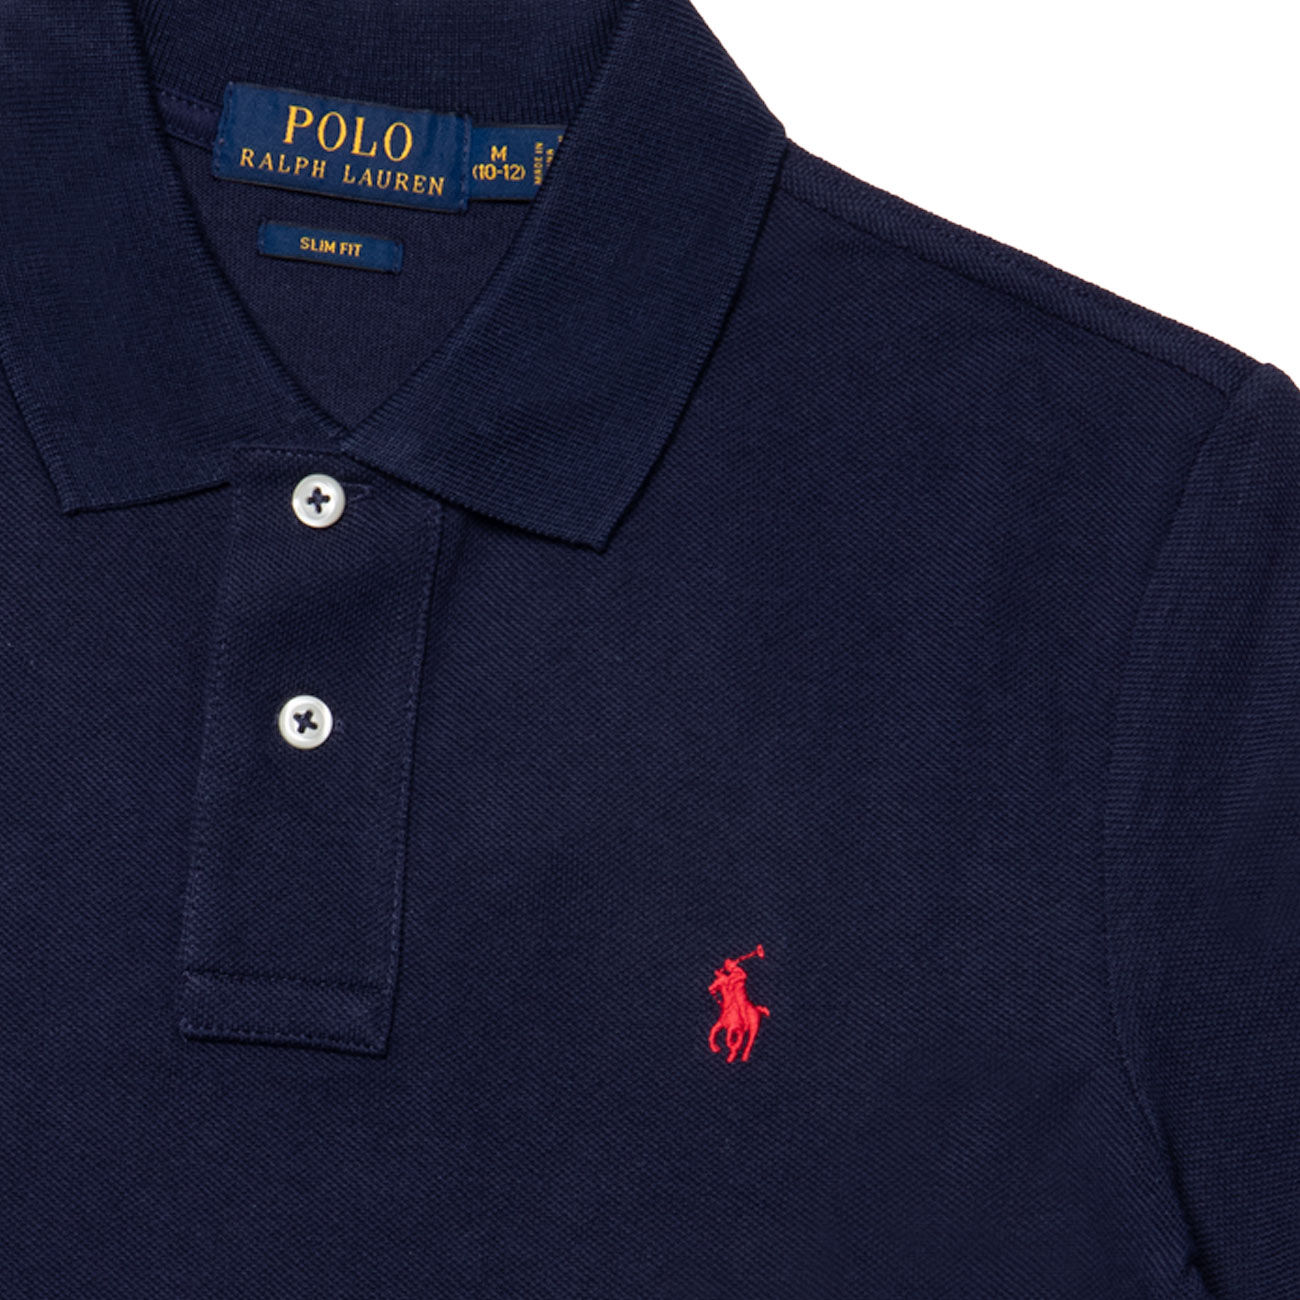 POLO RALPH LAUREN SLIM FIT PIQUE POLO SHIRT Kid French navy ...